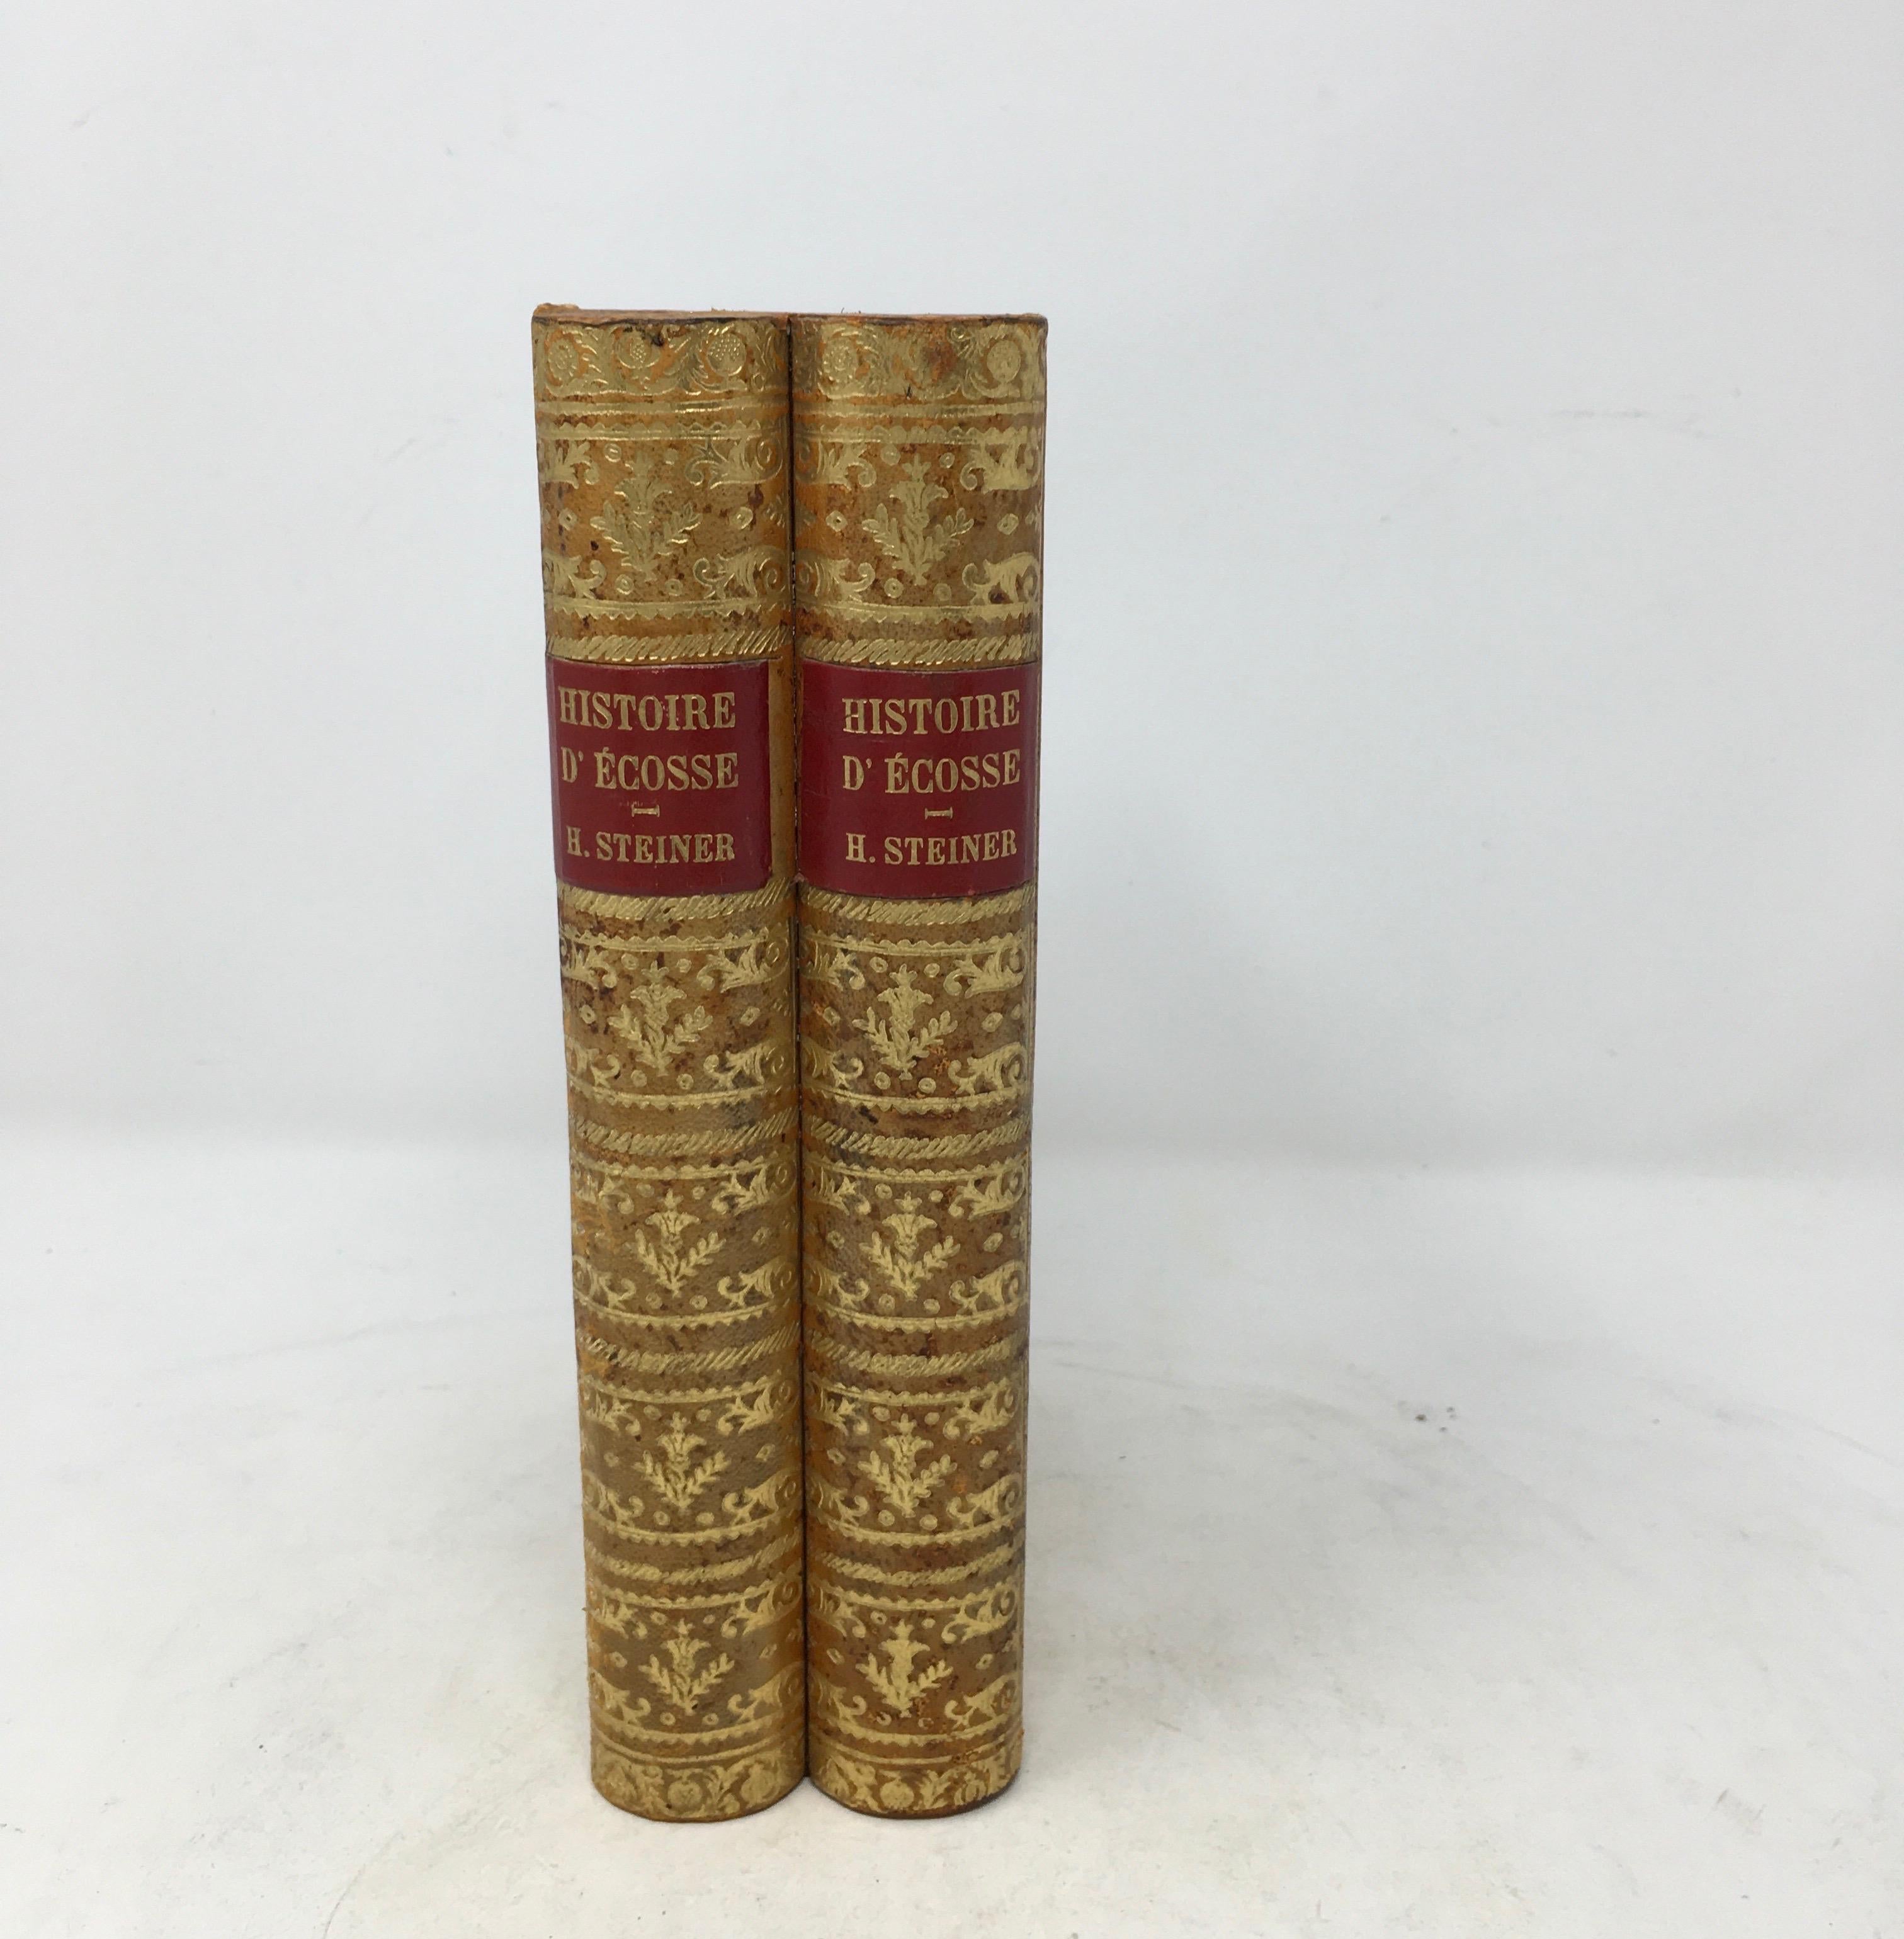 Collectible faux book with hidden flasks. The title, Histoire D' Ecosse, written in French translates to 